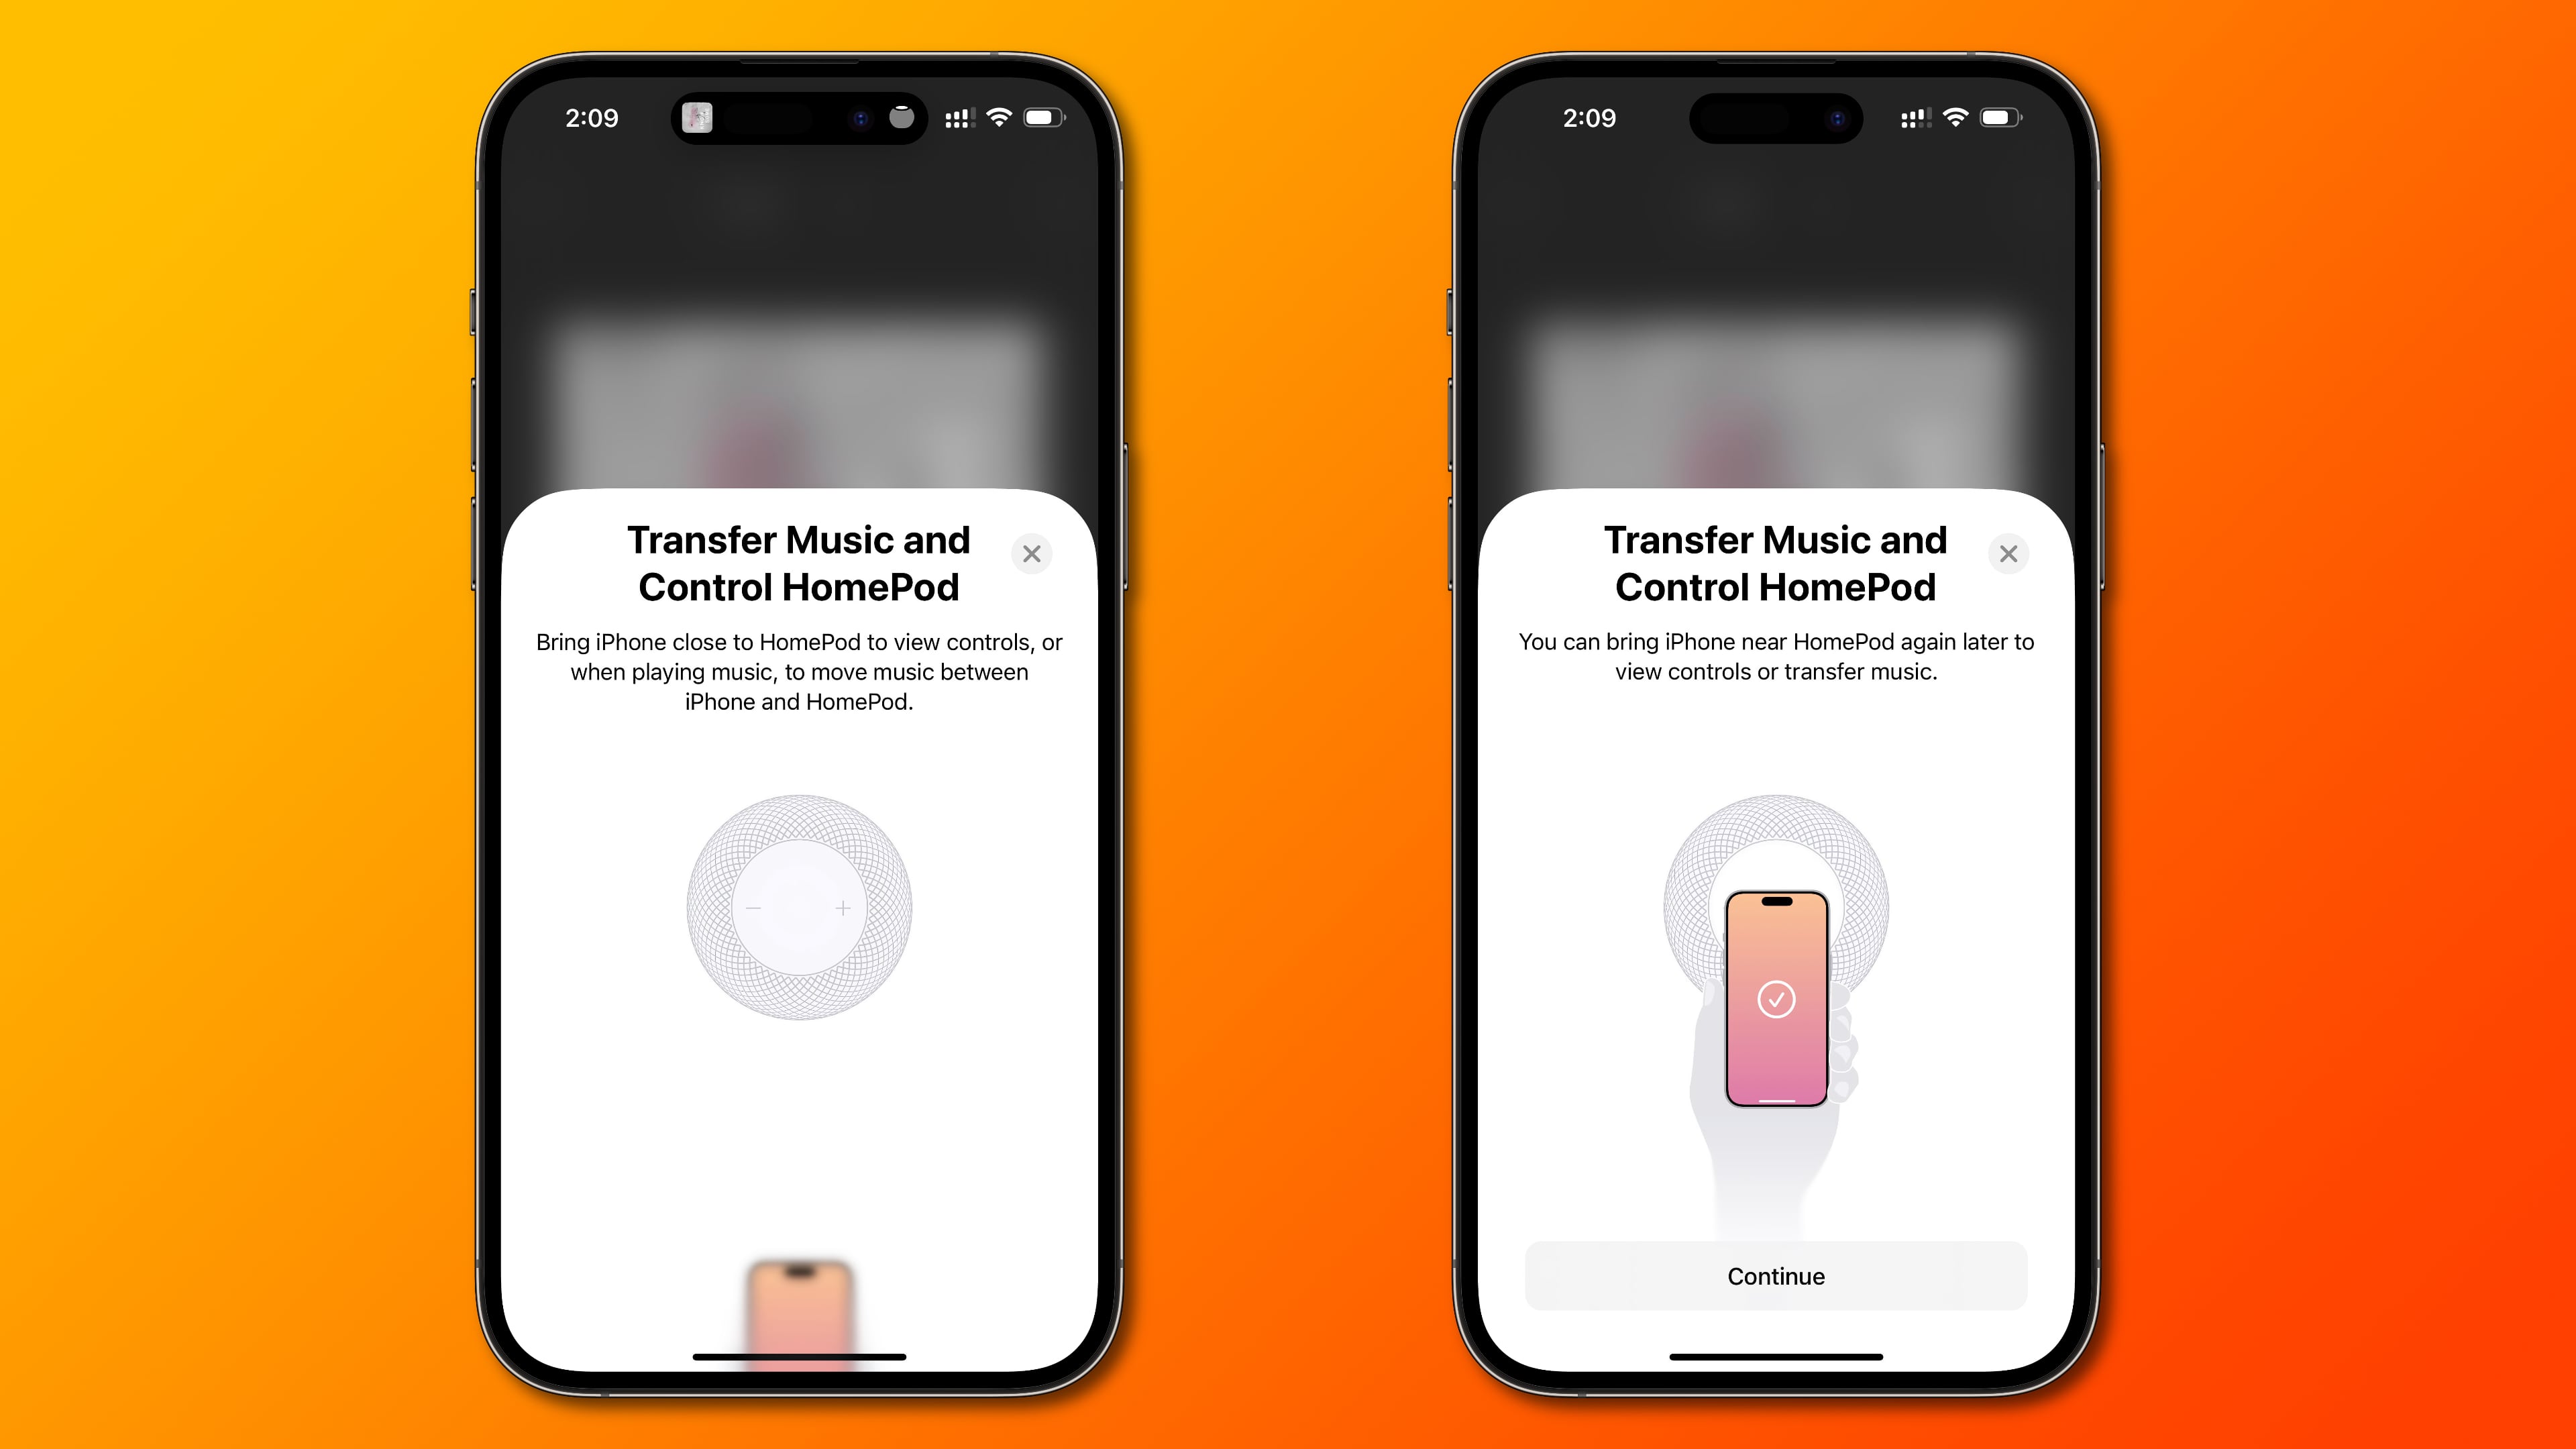 iOS 16.3 brings a visual guide for how to hand off music, calls and other audio content from iPhone to HomePod